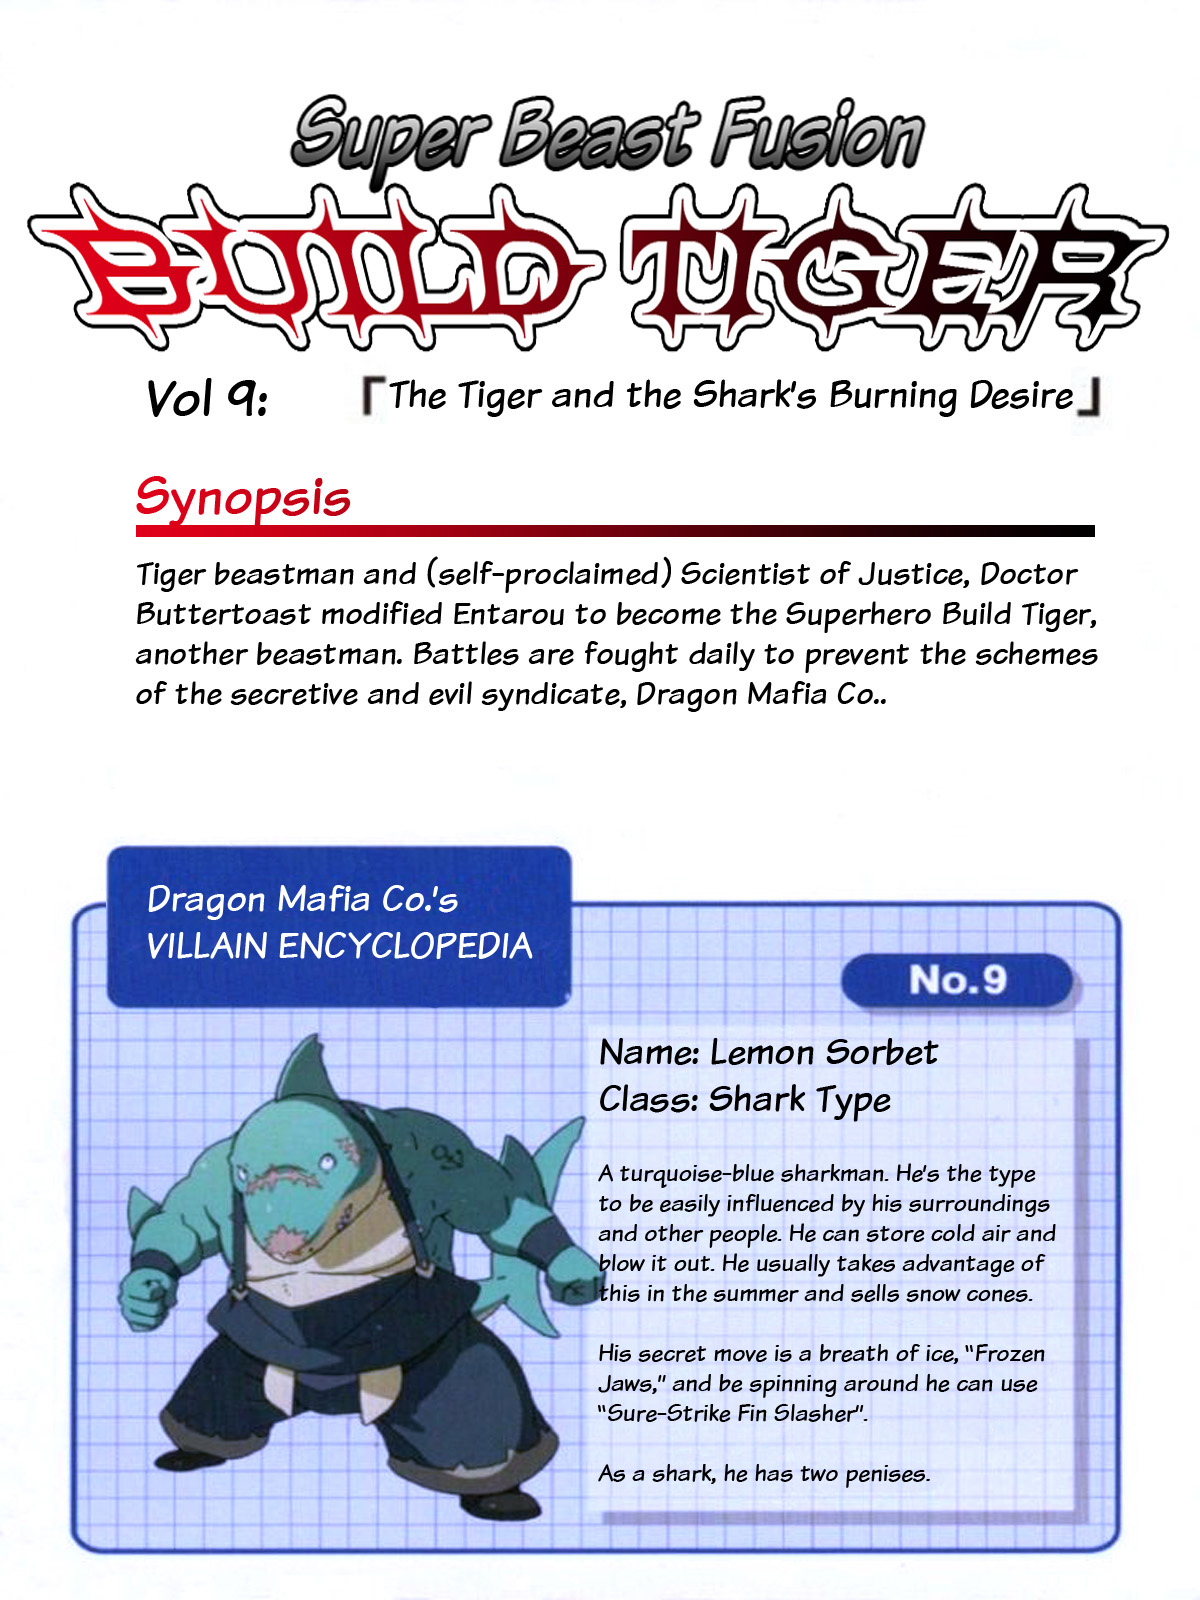 Gamma Dragon Heart Super Beast Fusion Build Tiger 09 The Tiger and the Shark's Burning Desire